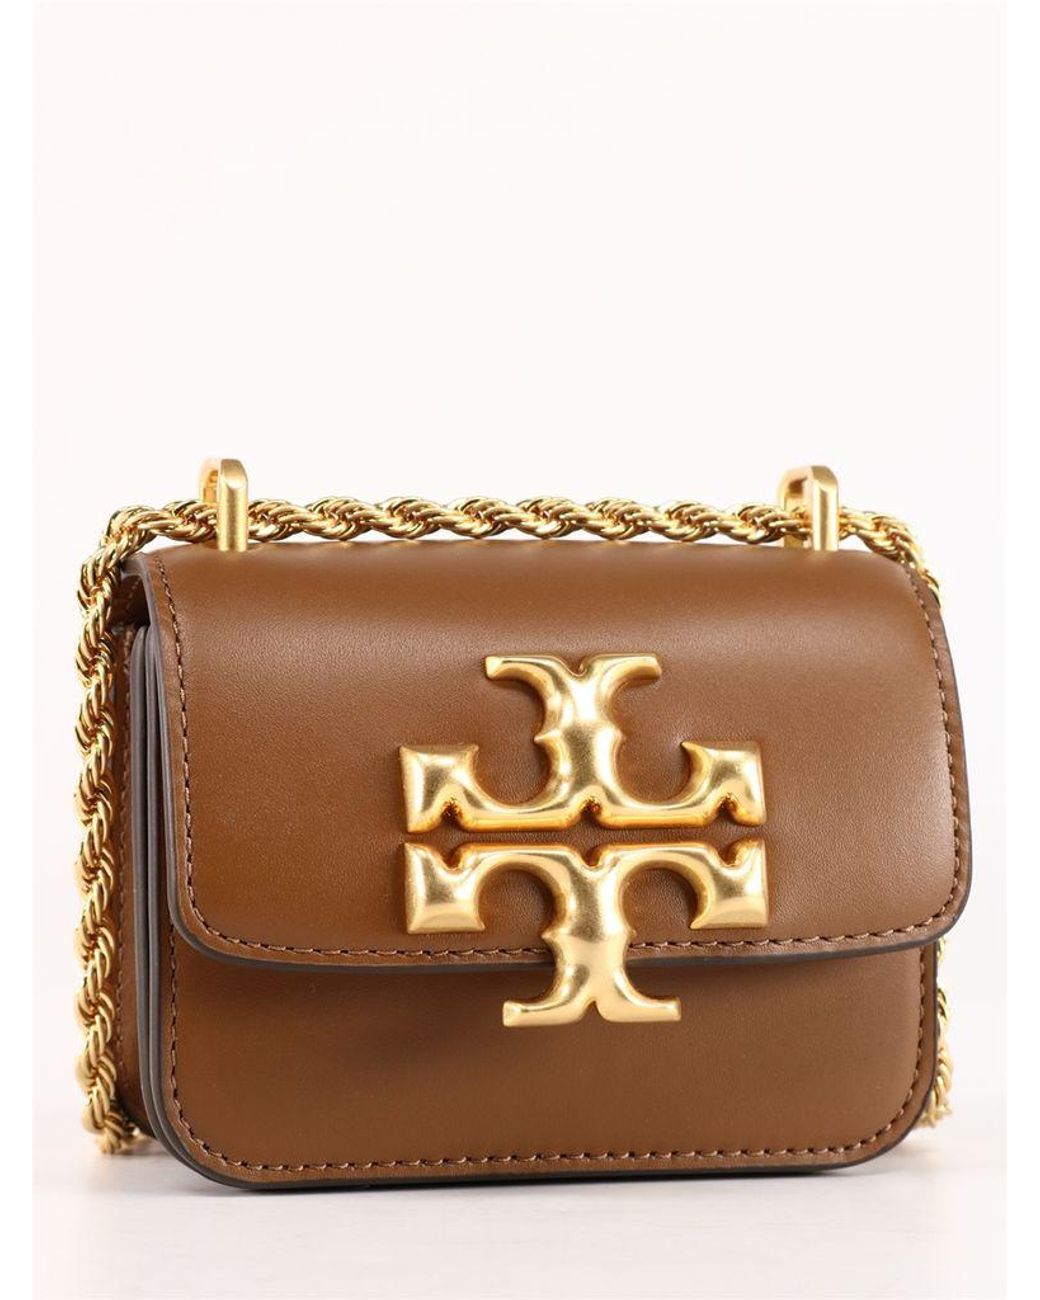 Tory Burch Leather Eleanor Mini Shoulder Bag in Brown - Lyst